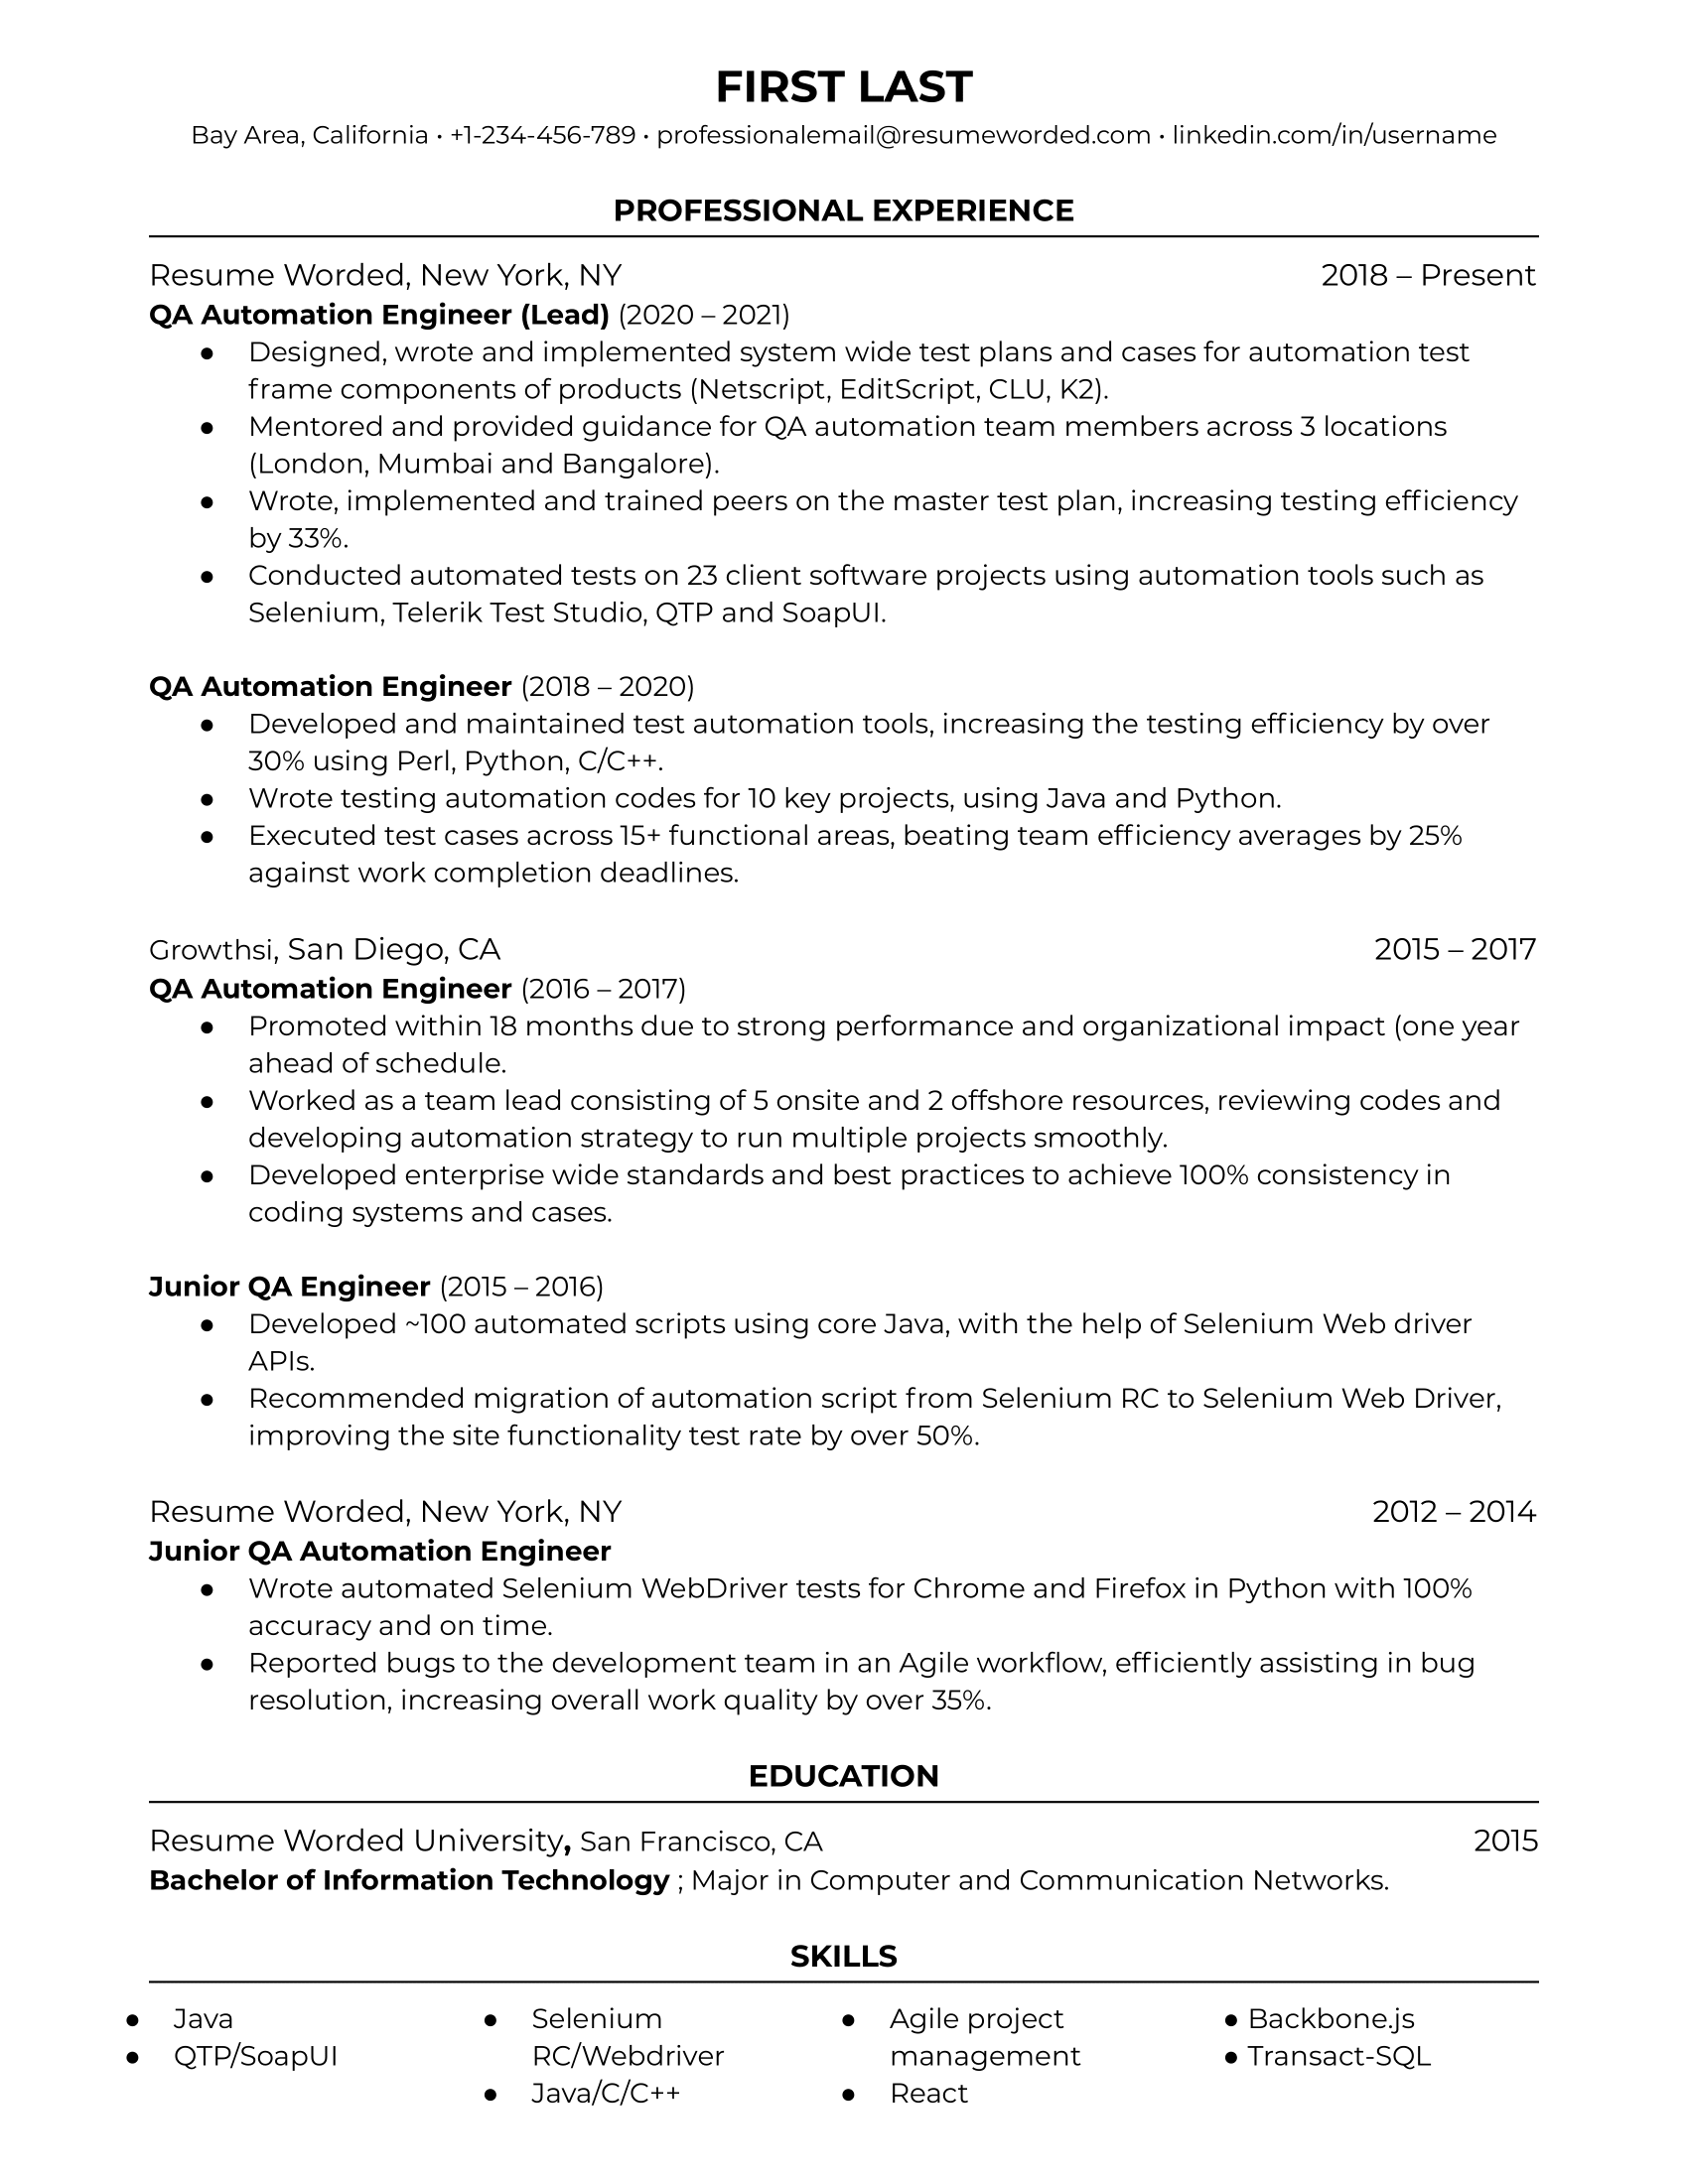 A sample QA Automation Engineer resume, which focuses on system-wide strategies for identifying bugs.